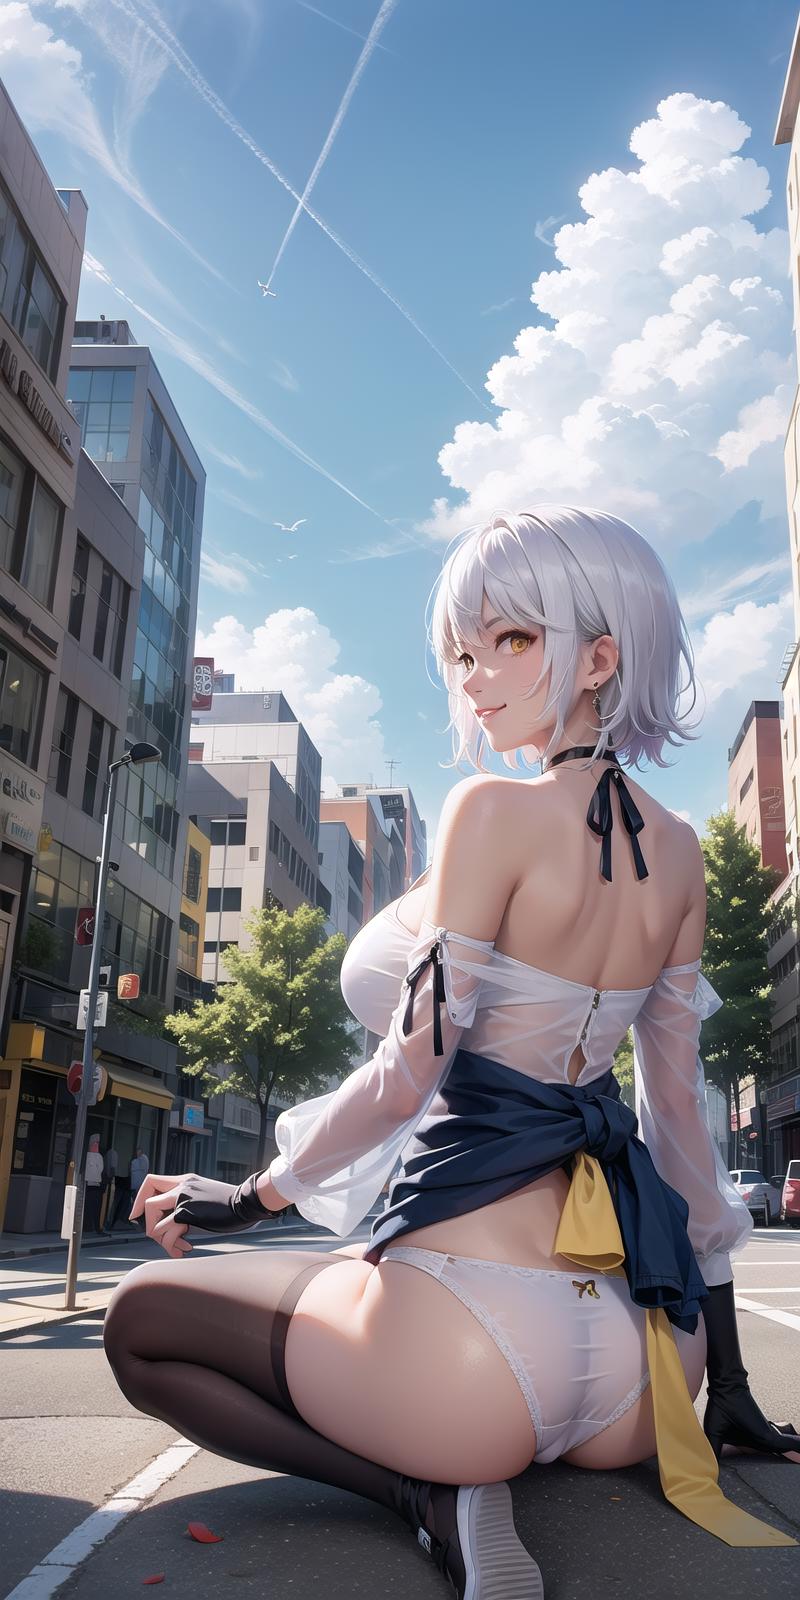 Carole Peppers (Honkai Impact 3rd) image by Kevinyi0219